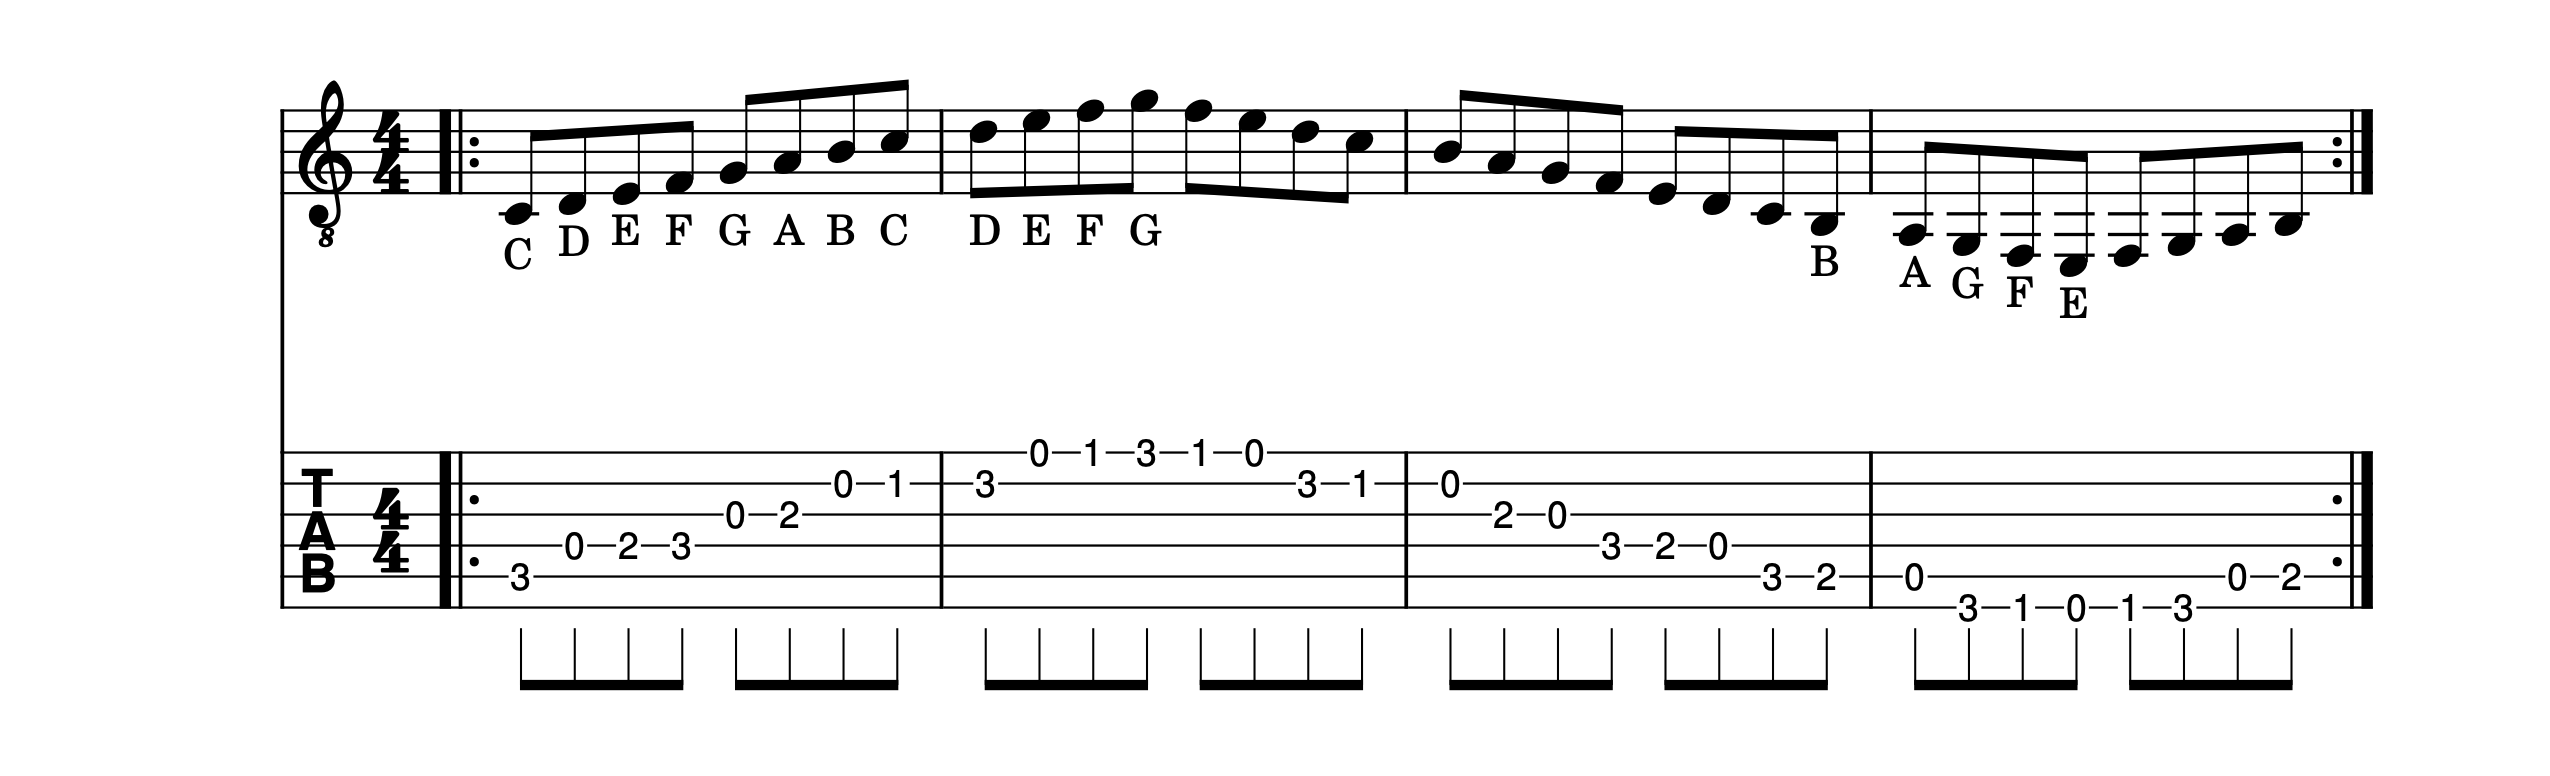 Understanding the Notes in Open Position on the Guitar